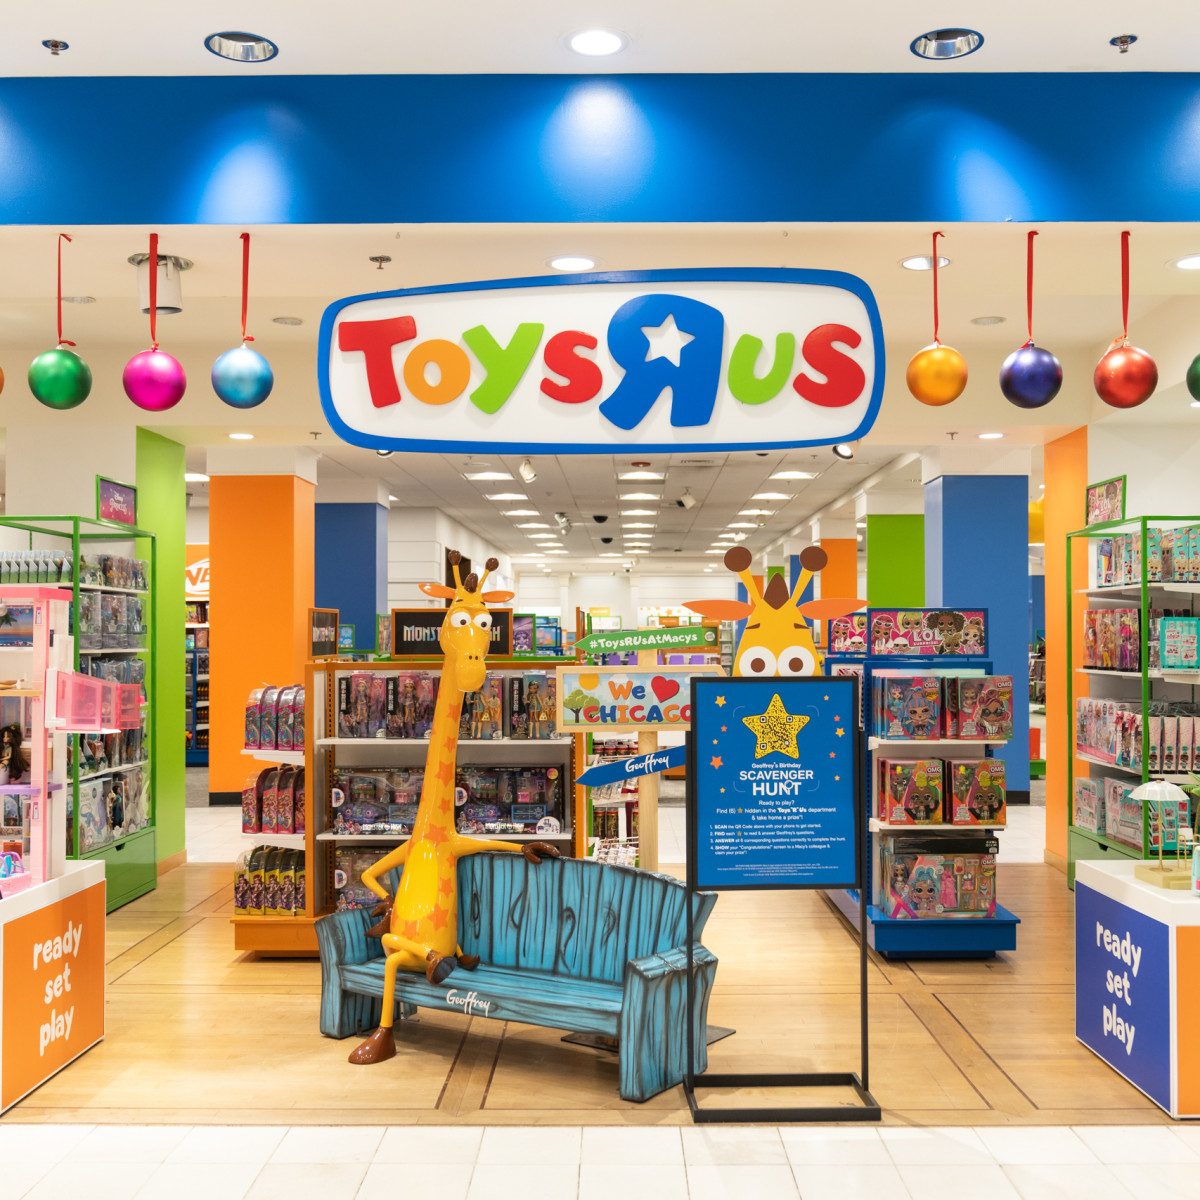 Toys 'R' Us celebrates grand opening at Macy's Herald Square in